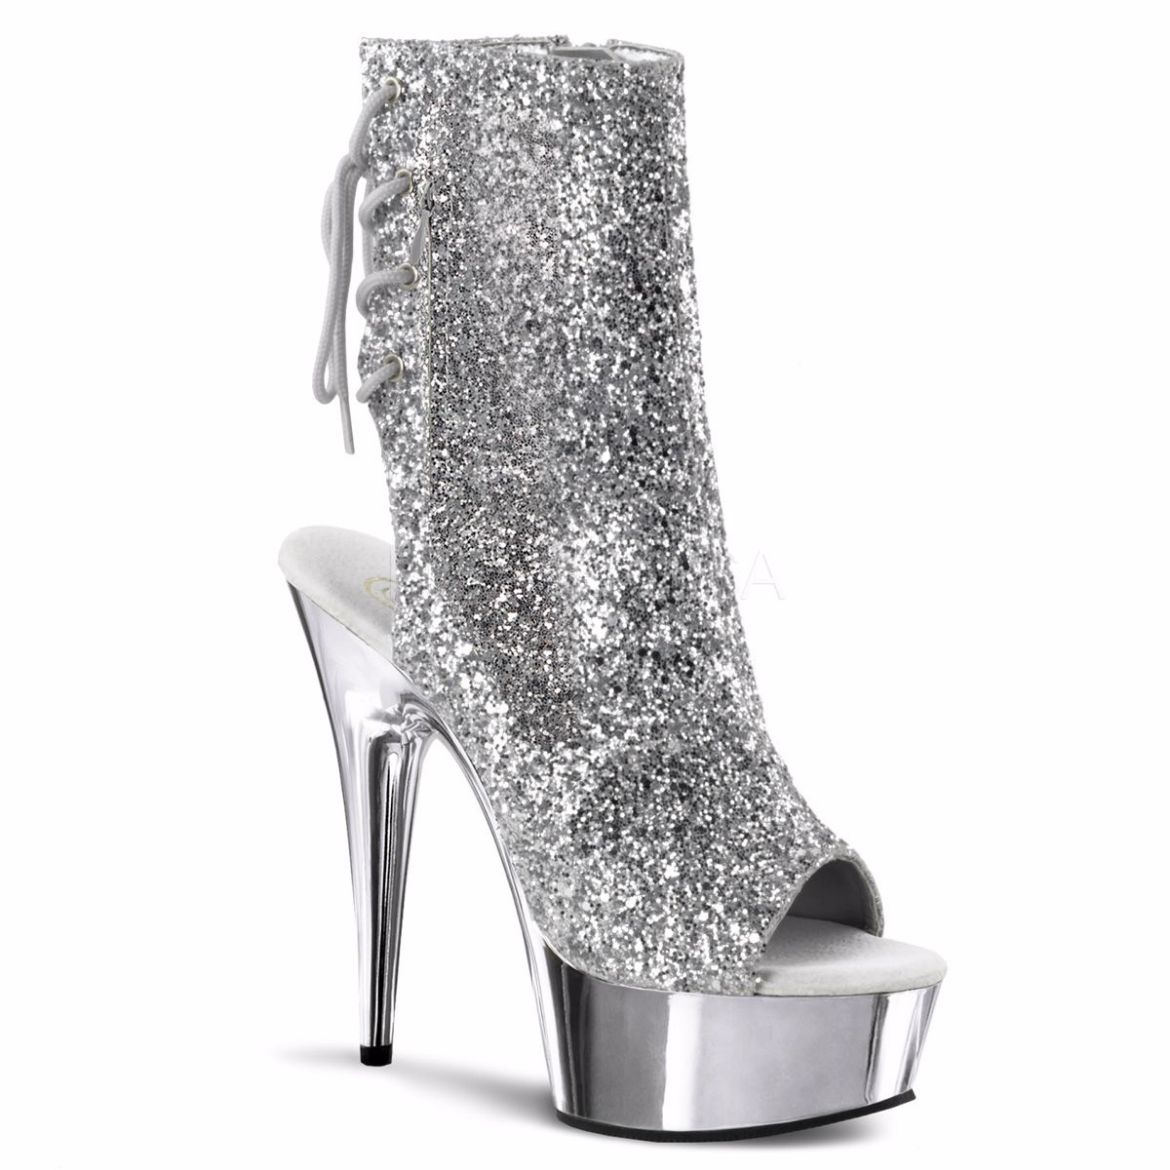 Product image of Pleaser Delight-1018G Silver Glitter/Silver Chrome, 6 inch (15.2 cm) Heel, 1 3/4 inch (4.4 cm) Platform Ankle Boot